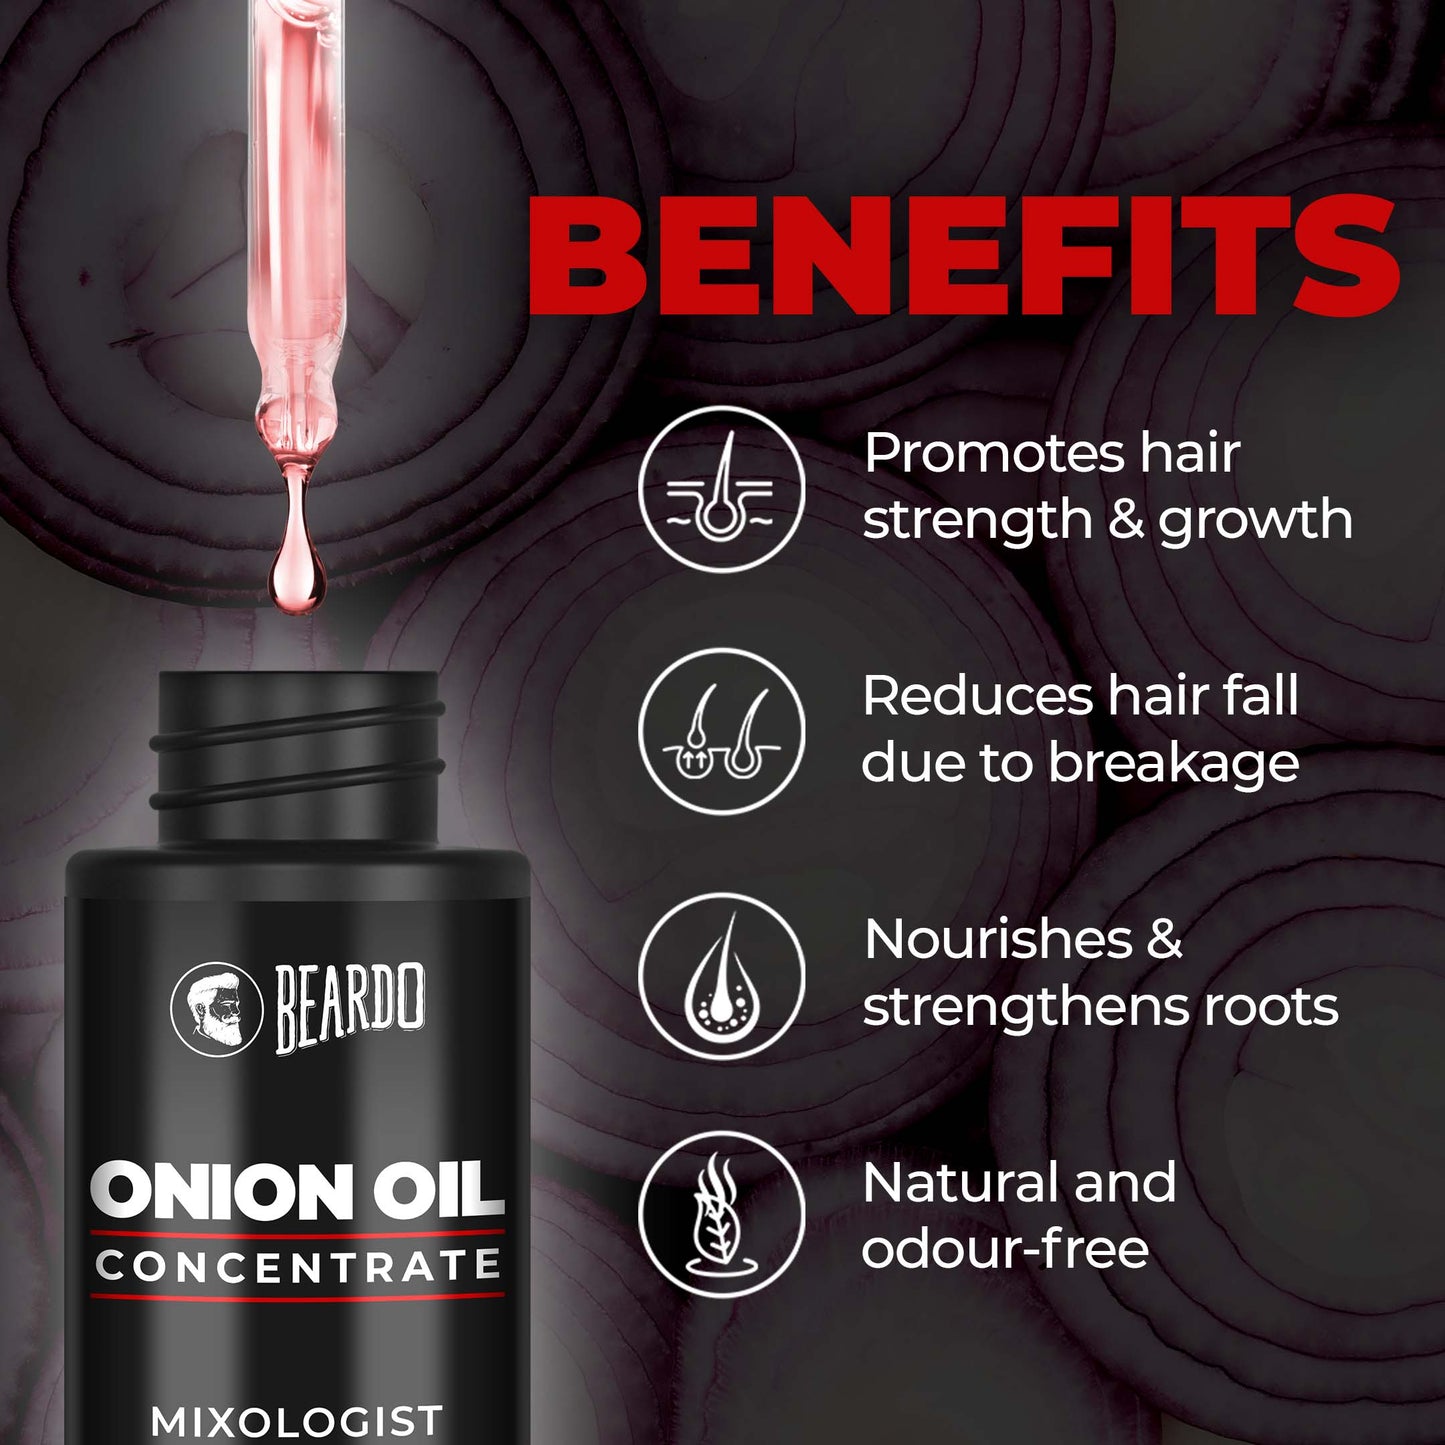 benefits of onion oil, onion oil benefits for hair, onion oil benefits, onion oil benefits in men